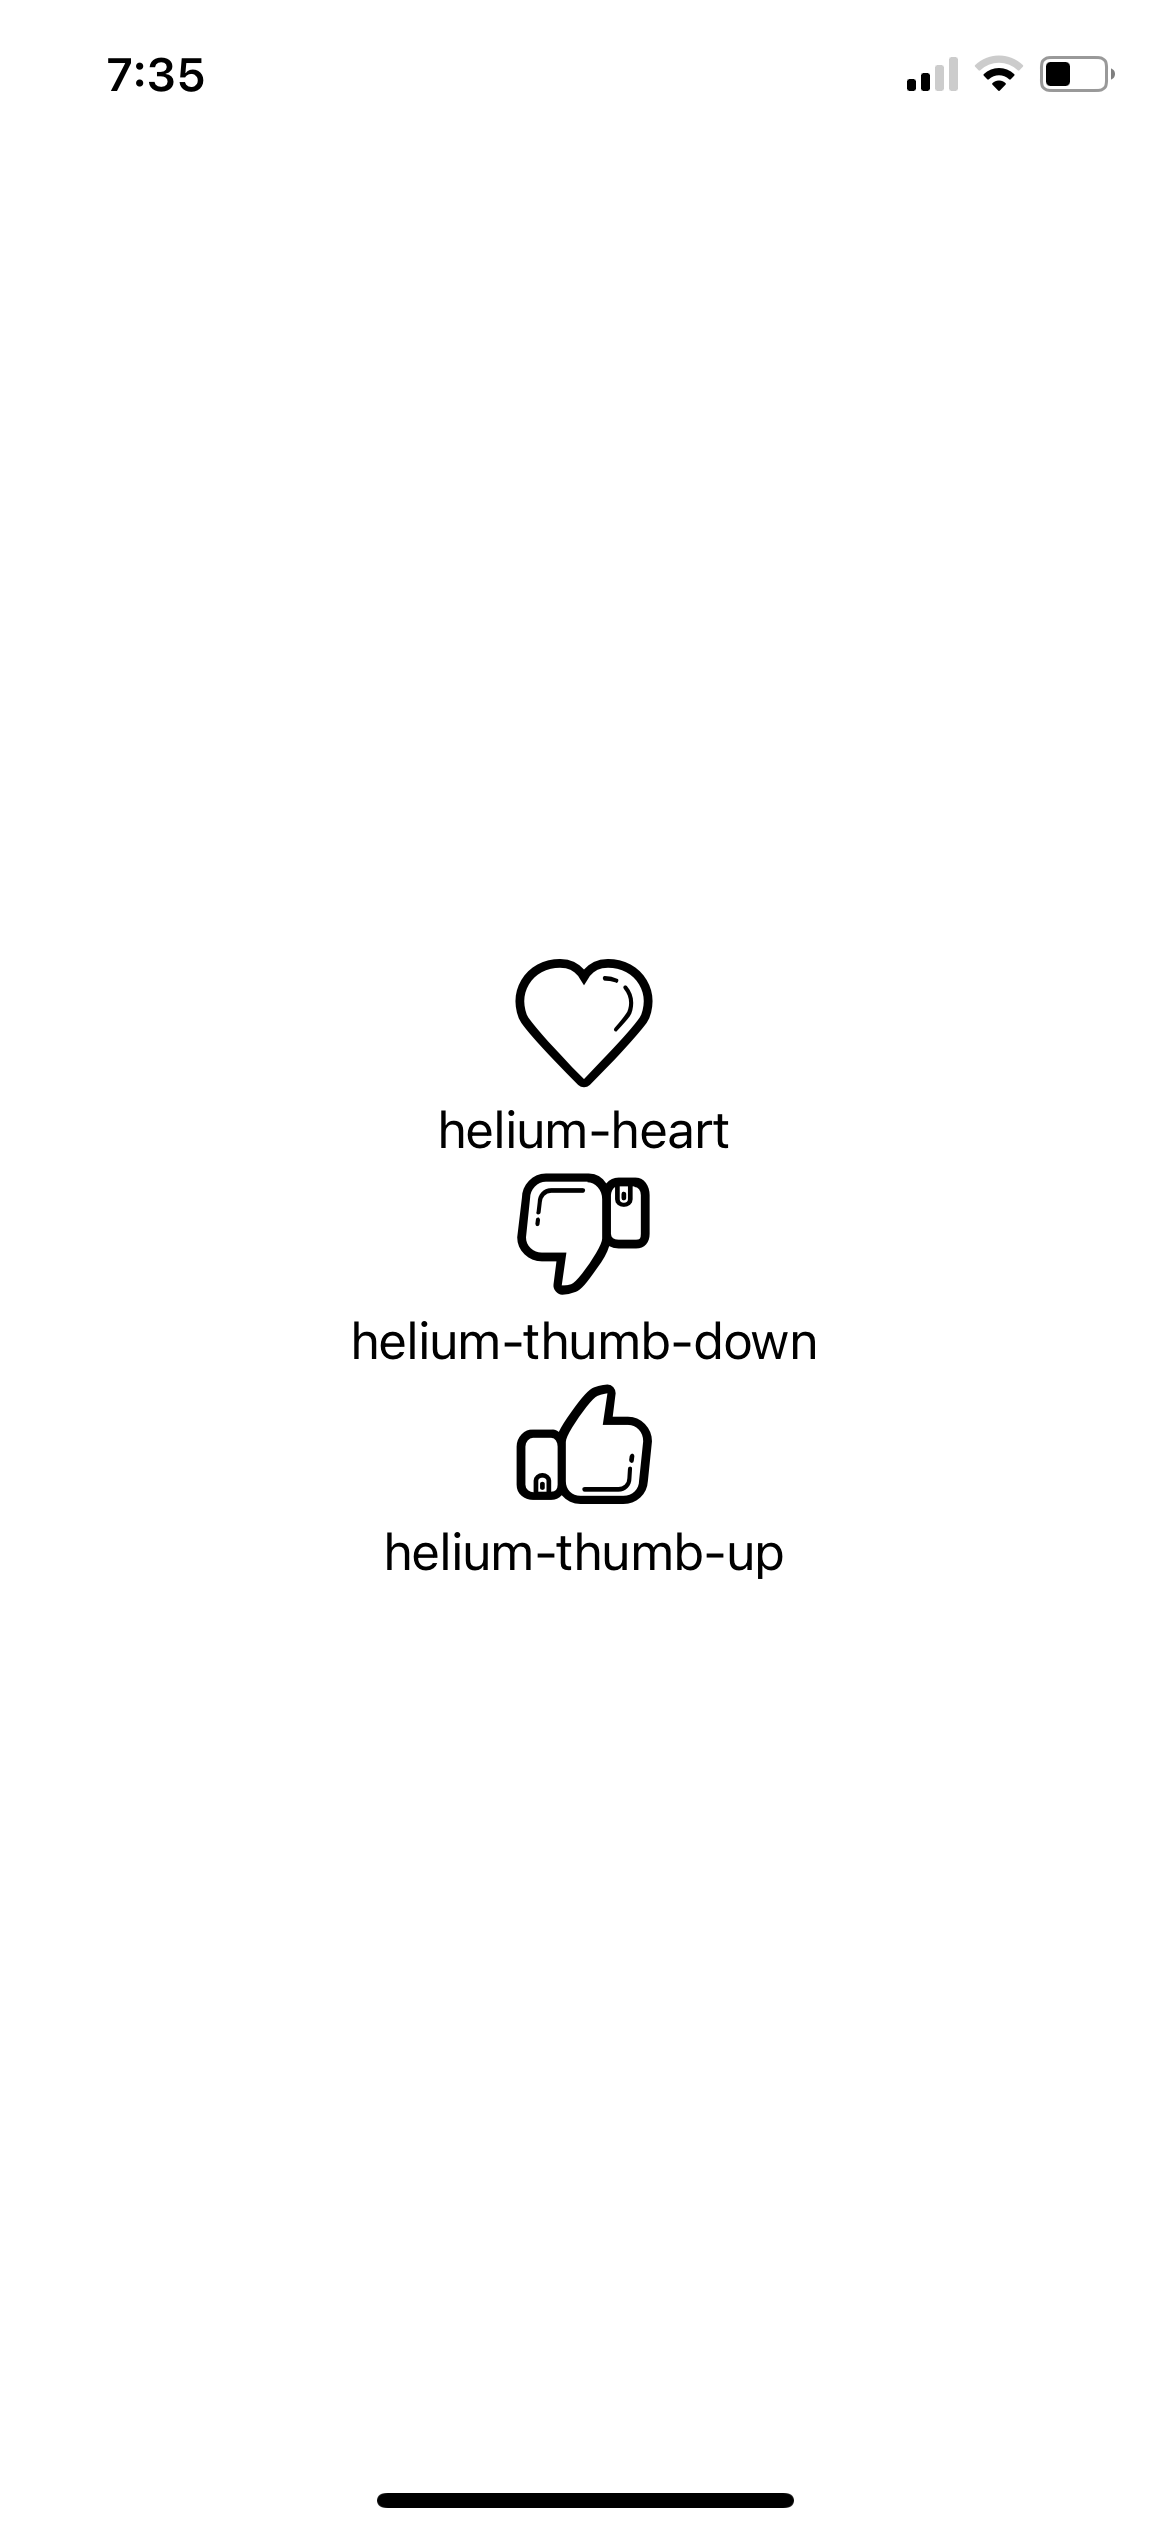 Heart, thumb down and up icons in browser